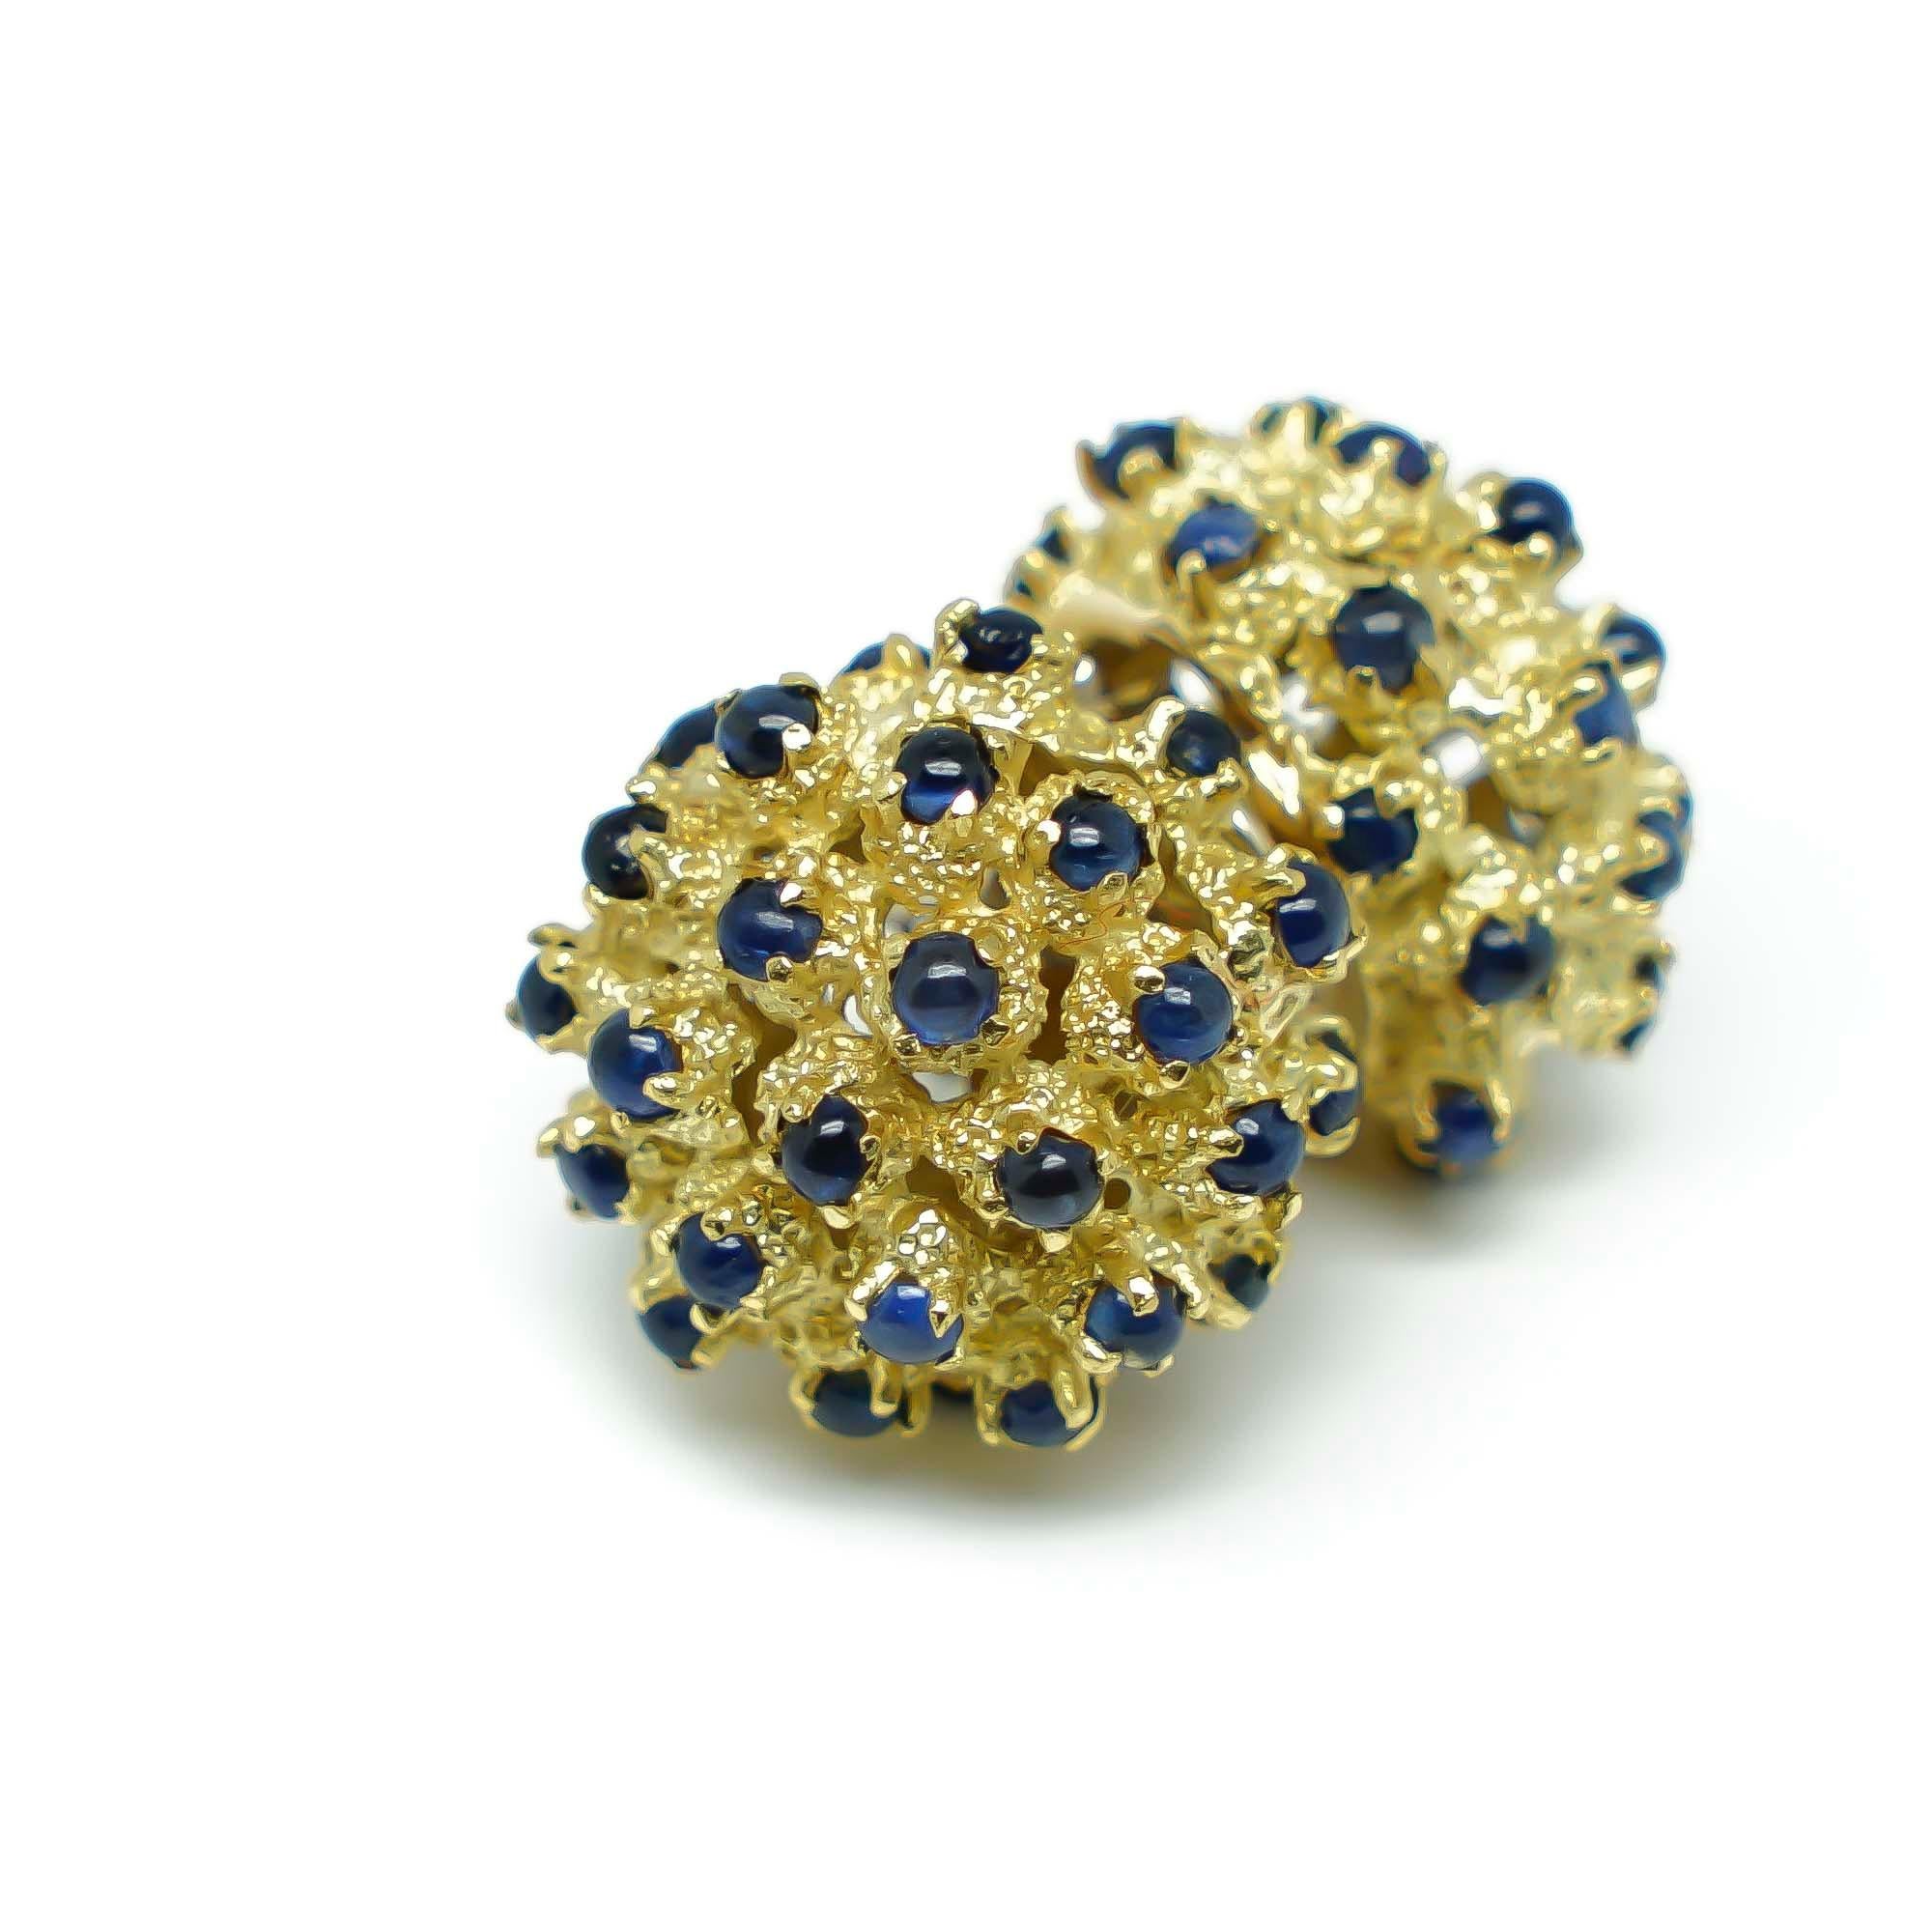 Urchin Earrings in Gold 18 karats with Sapphires cabochon. It's a piece that has a strong and Original Liberty Design with a beautiful detailed structure totally Handcrafted that makes it Unique and a real Piece of Art to wear or collect. Something